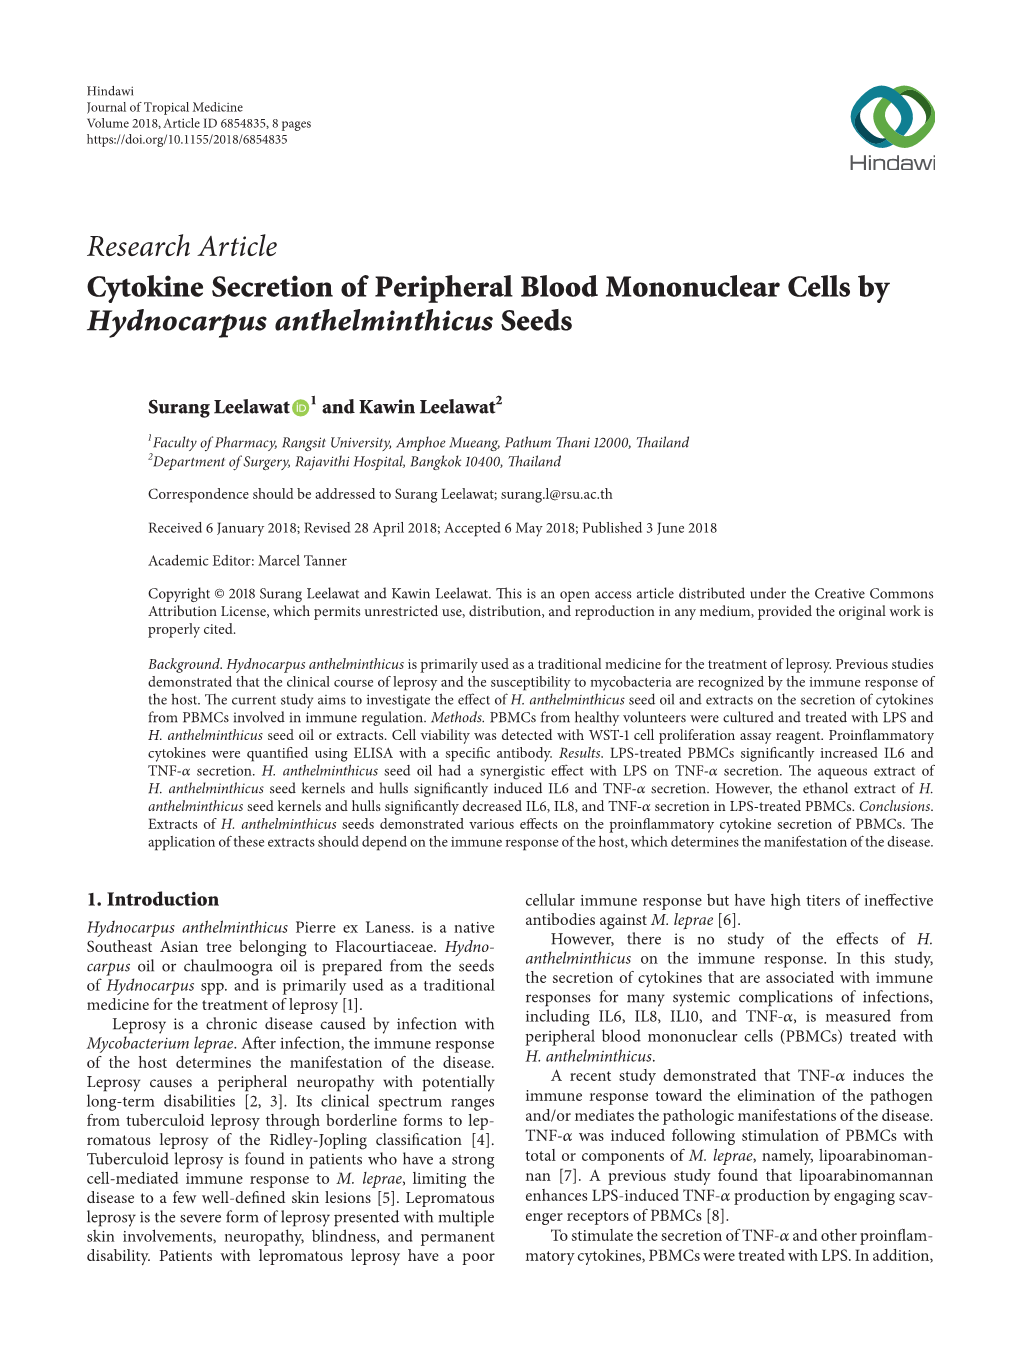 Cytokine Secretion of Peripheral Blood Mononuclear Cells by Hydnocarpus Anthelminthicus Seeds